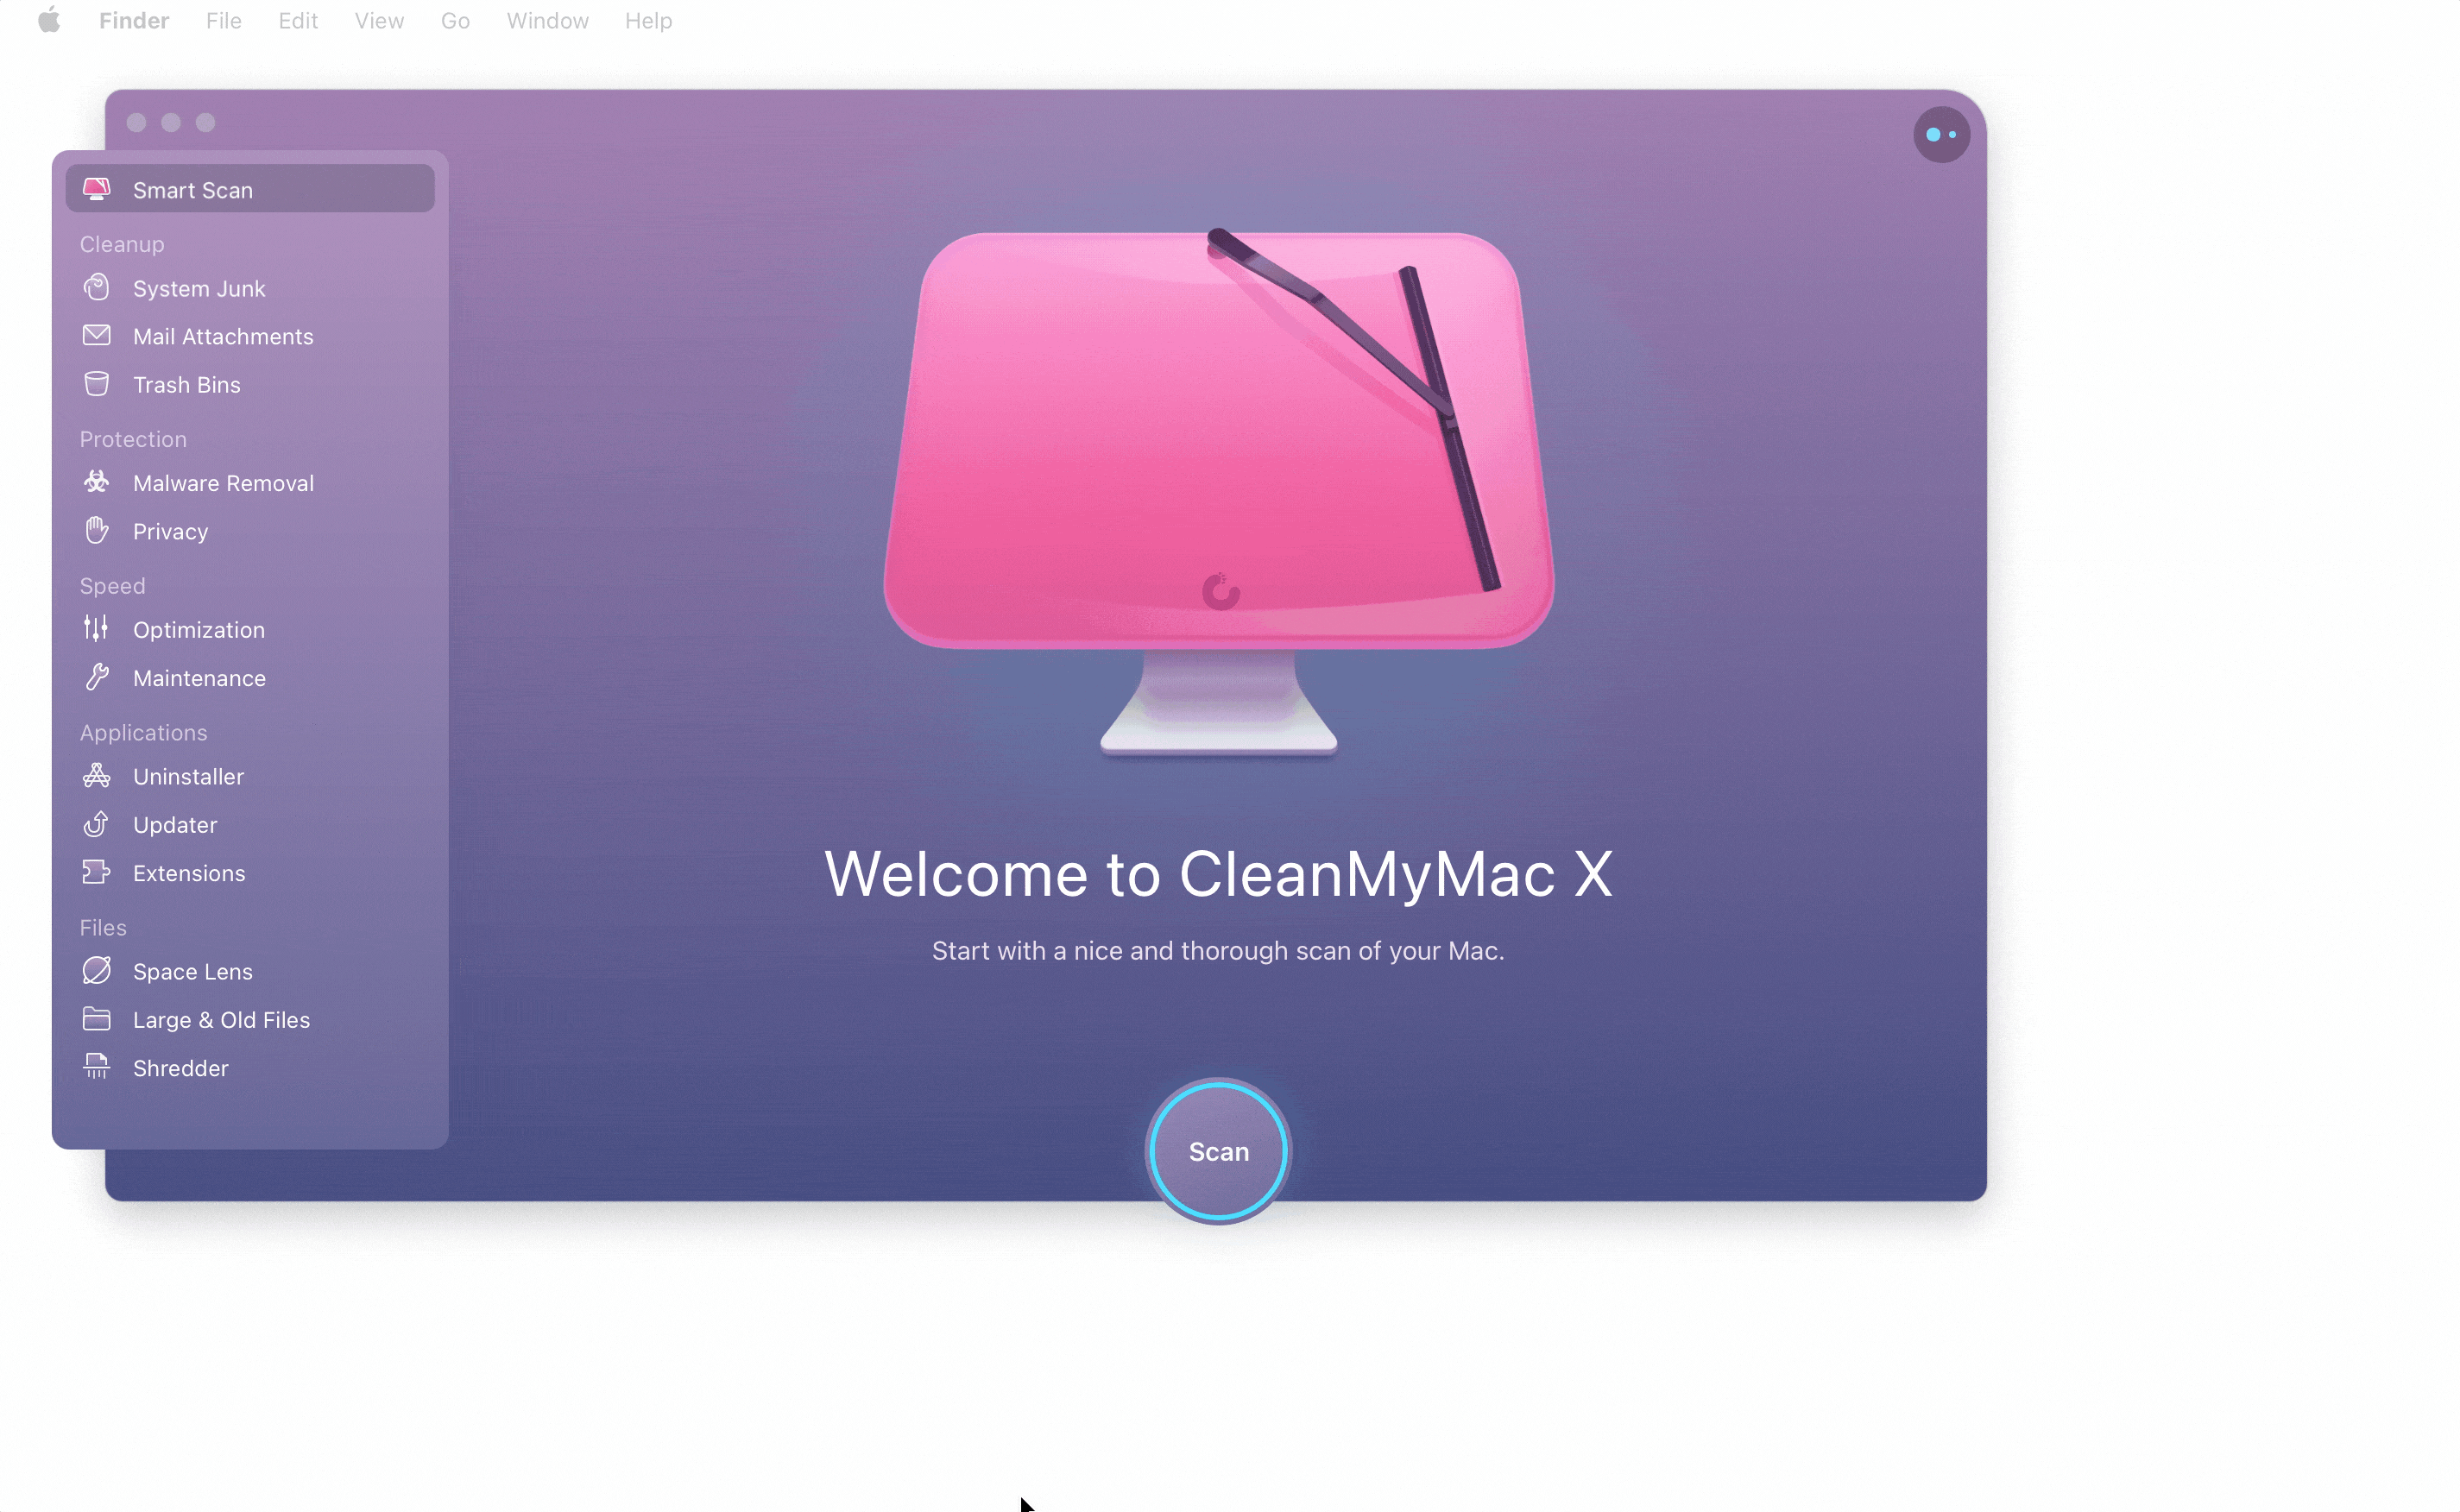 Customize smart scan in CleanMyMac X